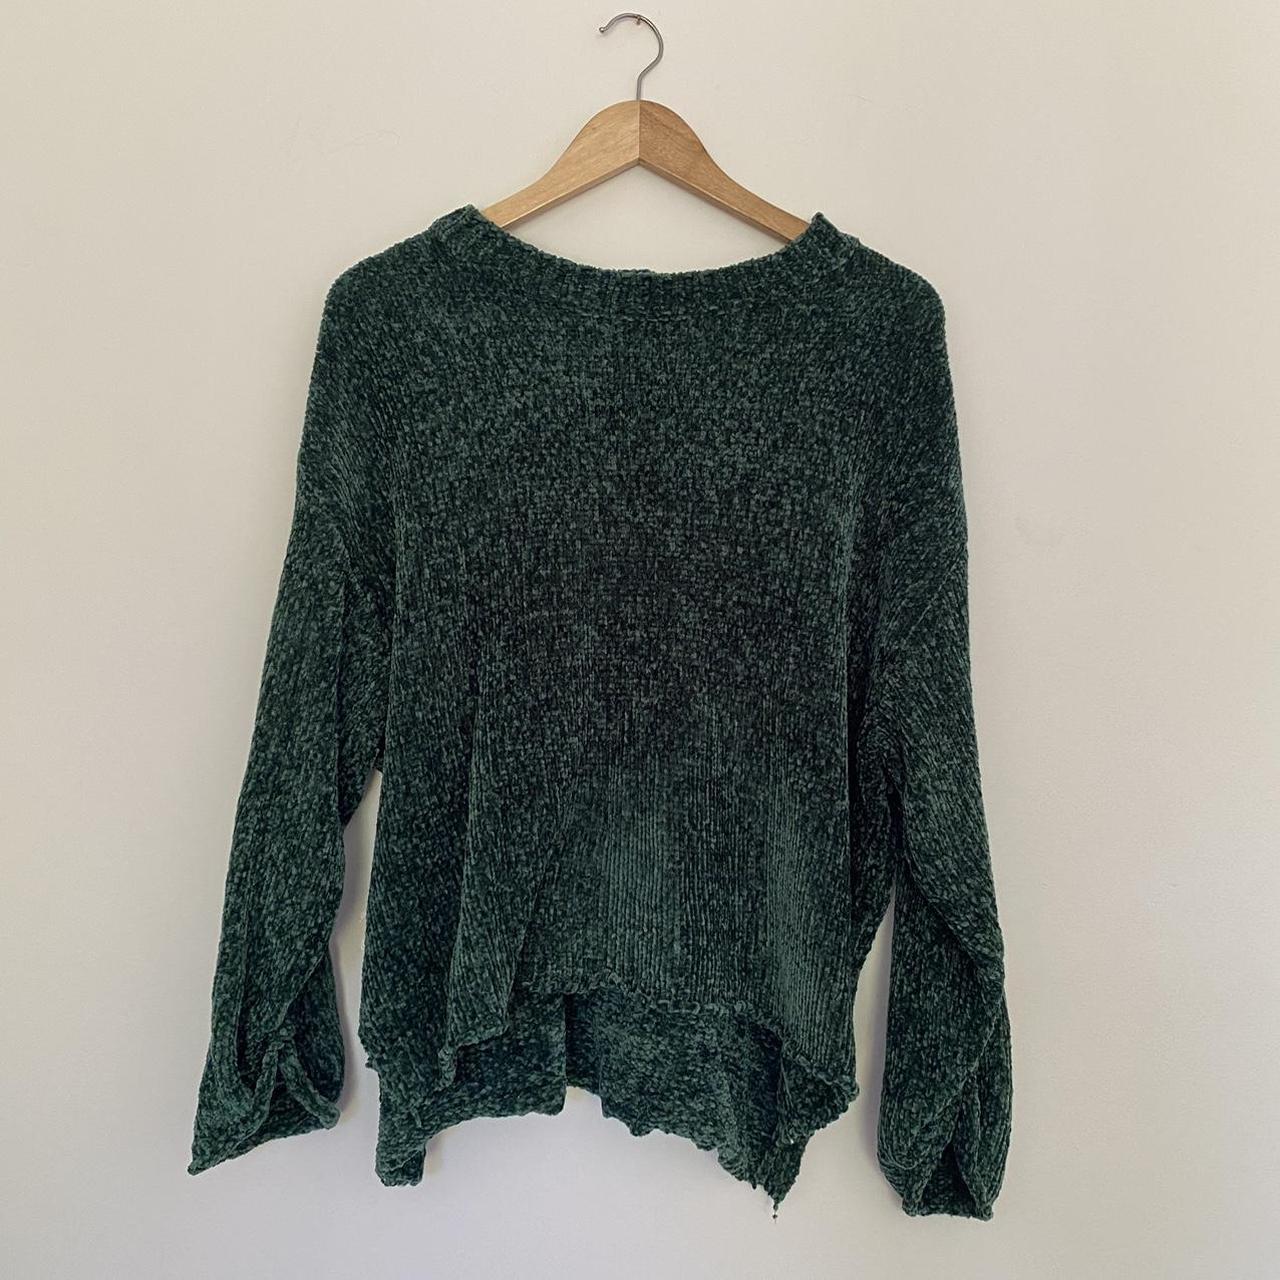 Tree of Life Green / Teal Jumper One Size Fits all... - Depop